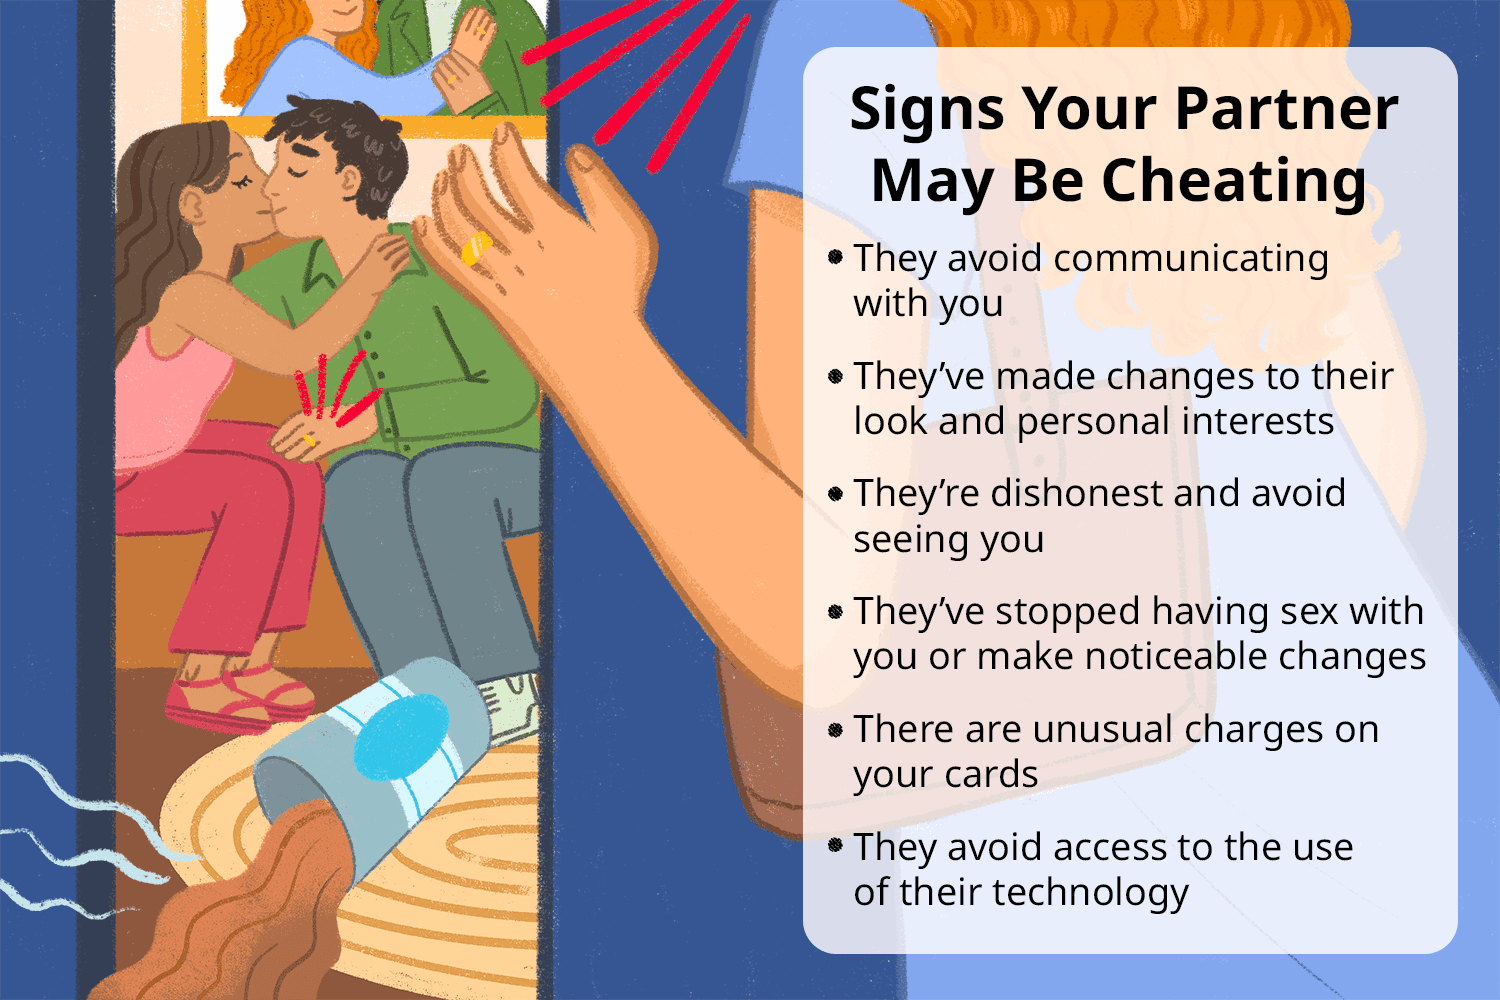 How To Tell If She Is Cheating On You